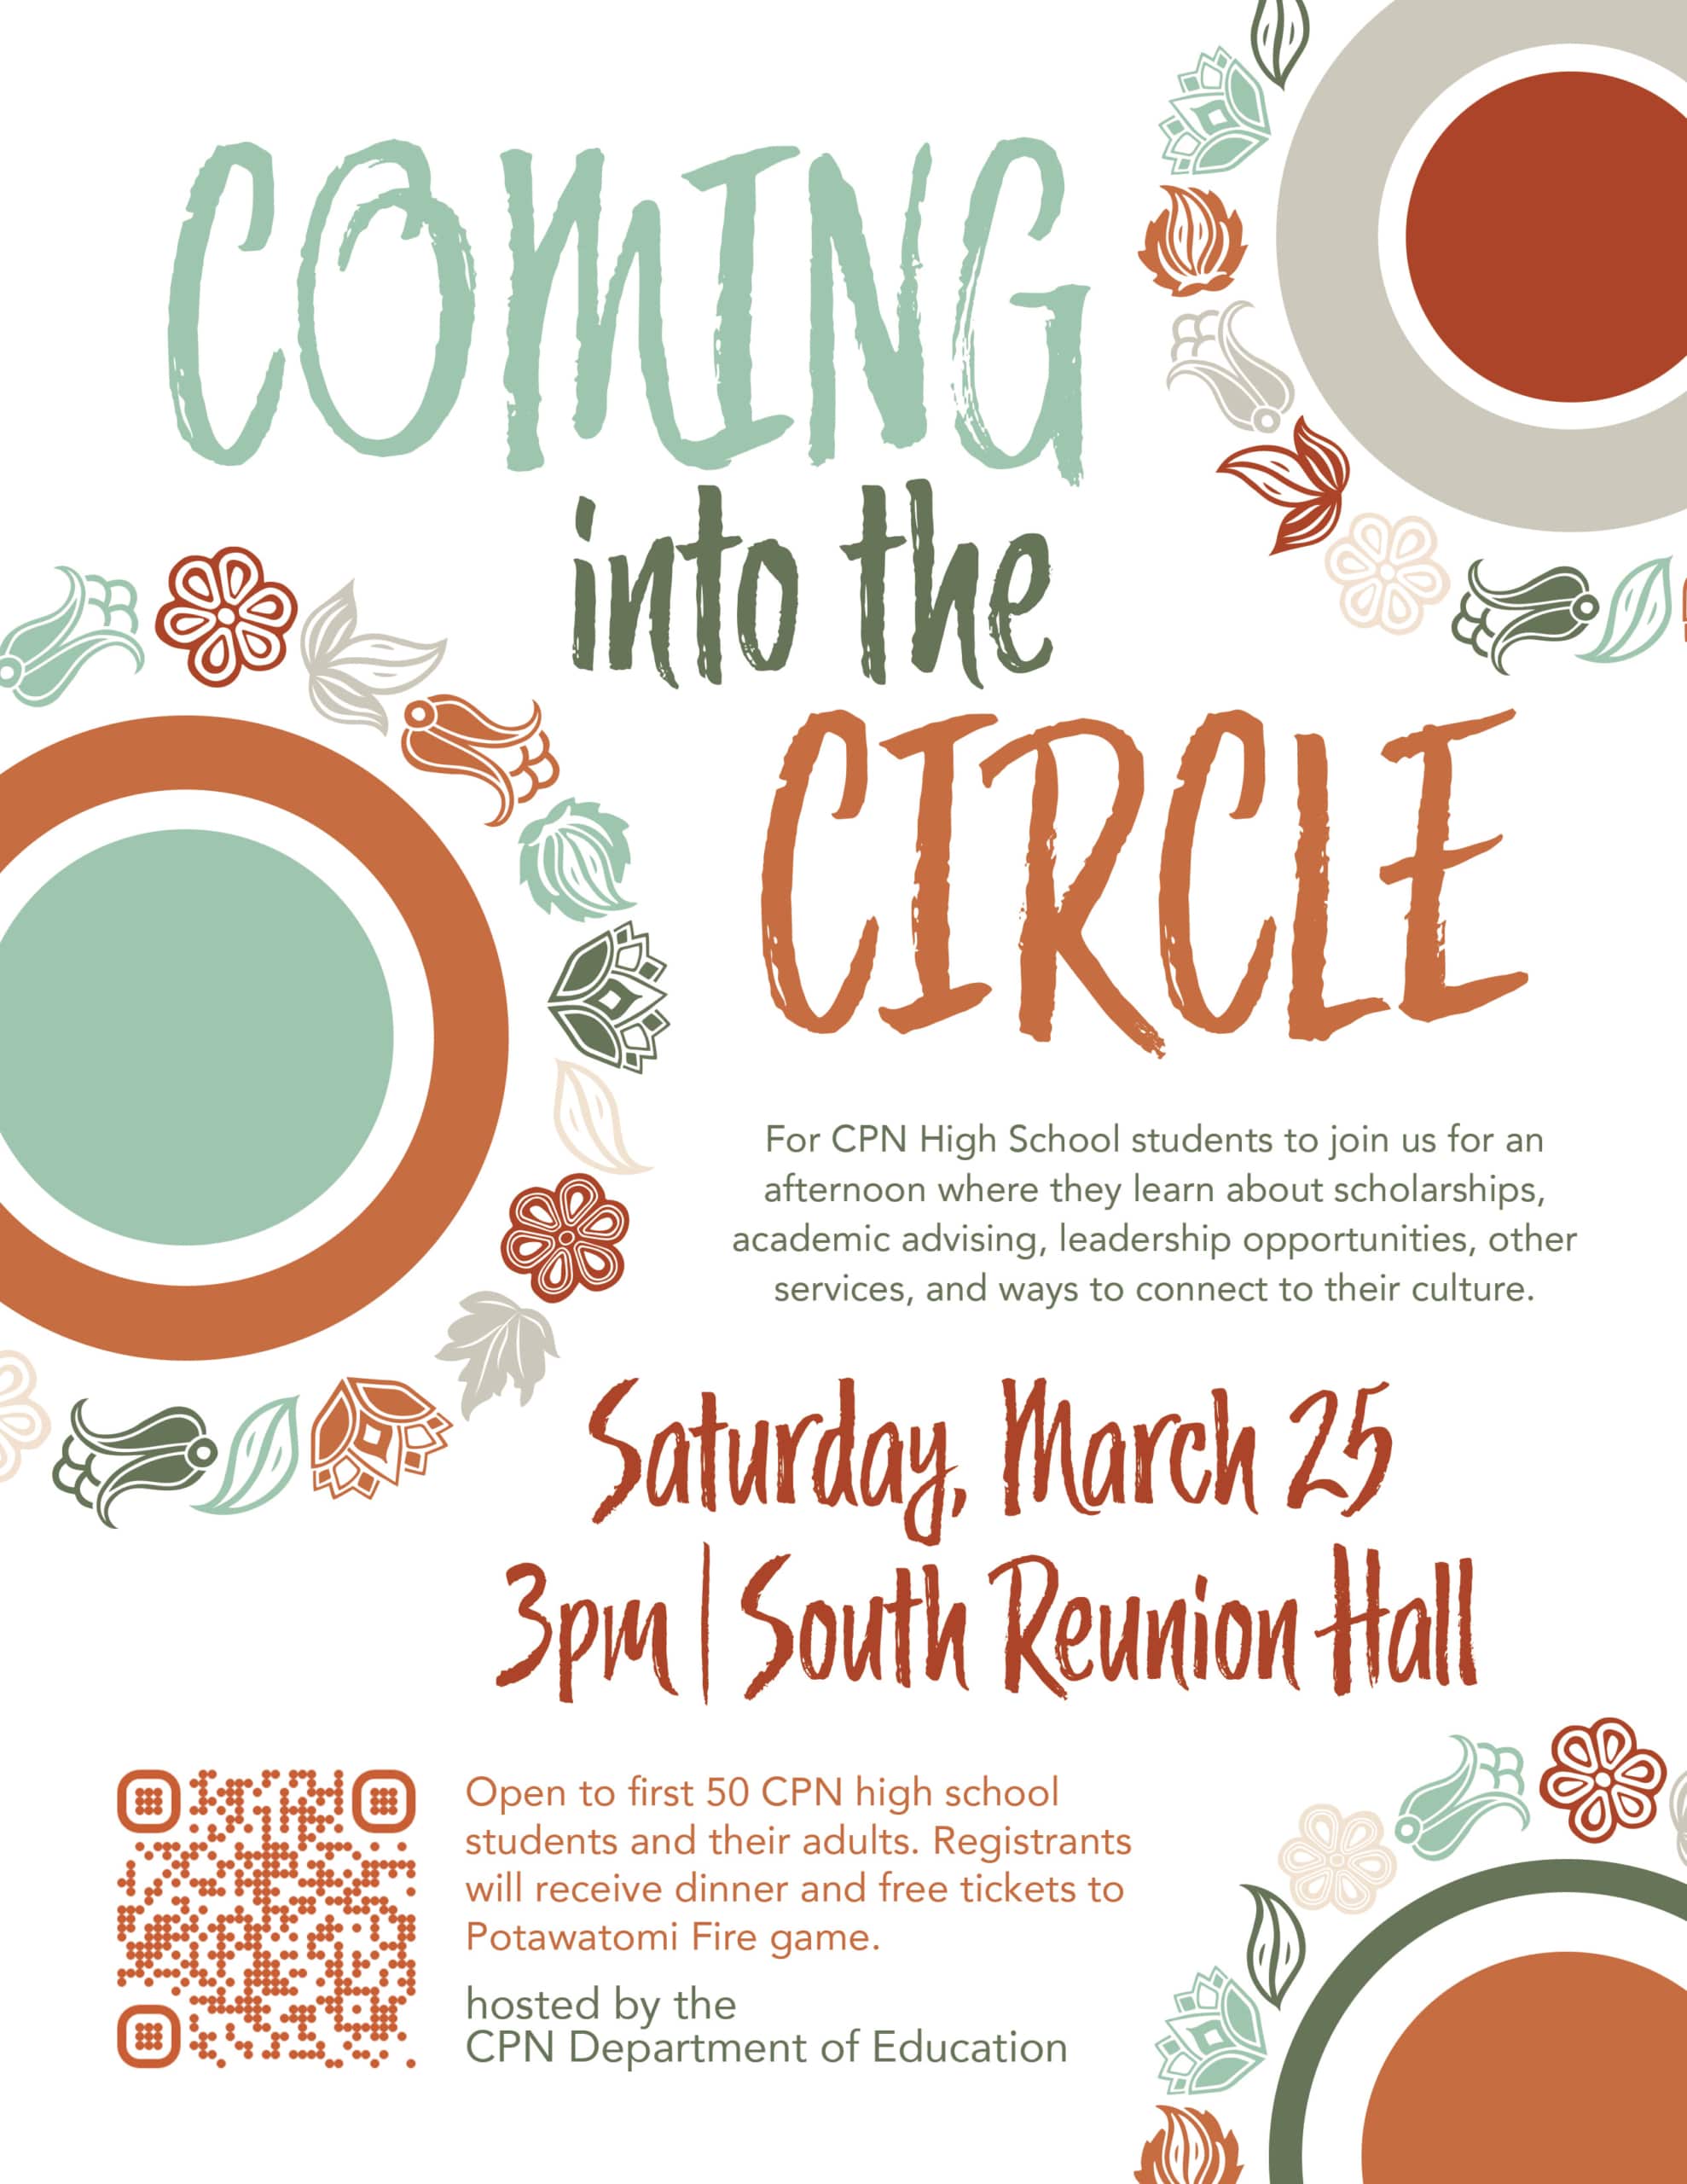 Green and rust colored circles and floral designs frame event details for "Coming into the Circle."